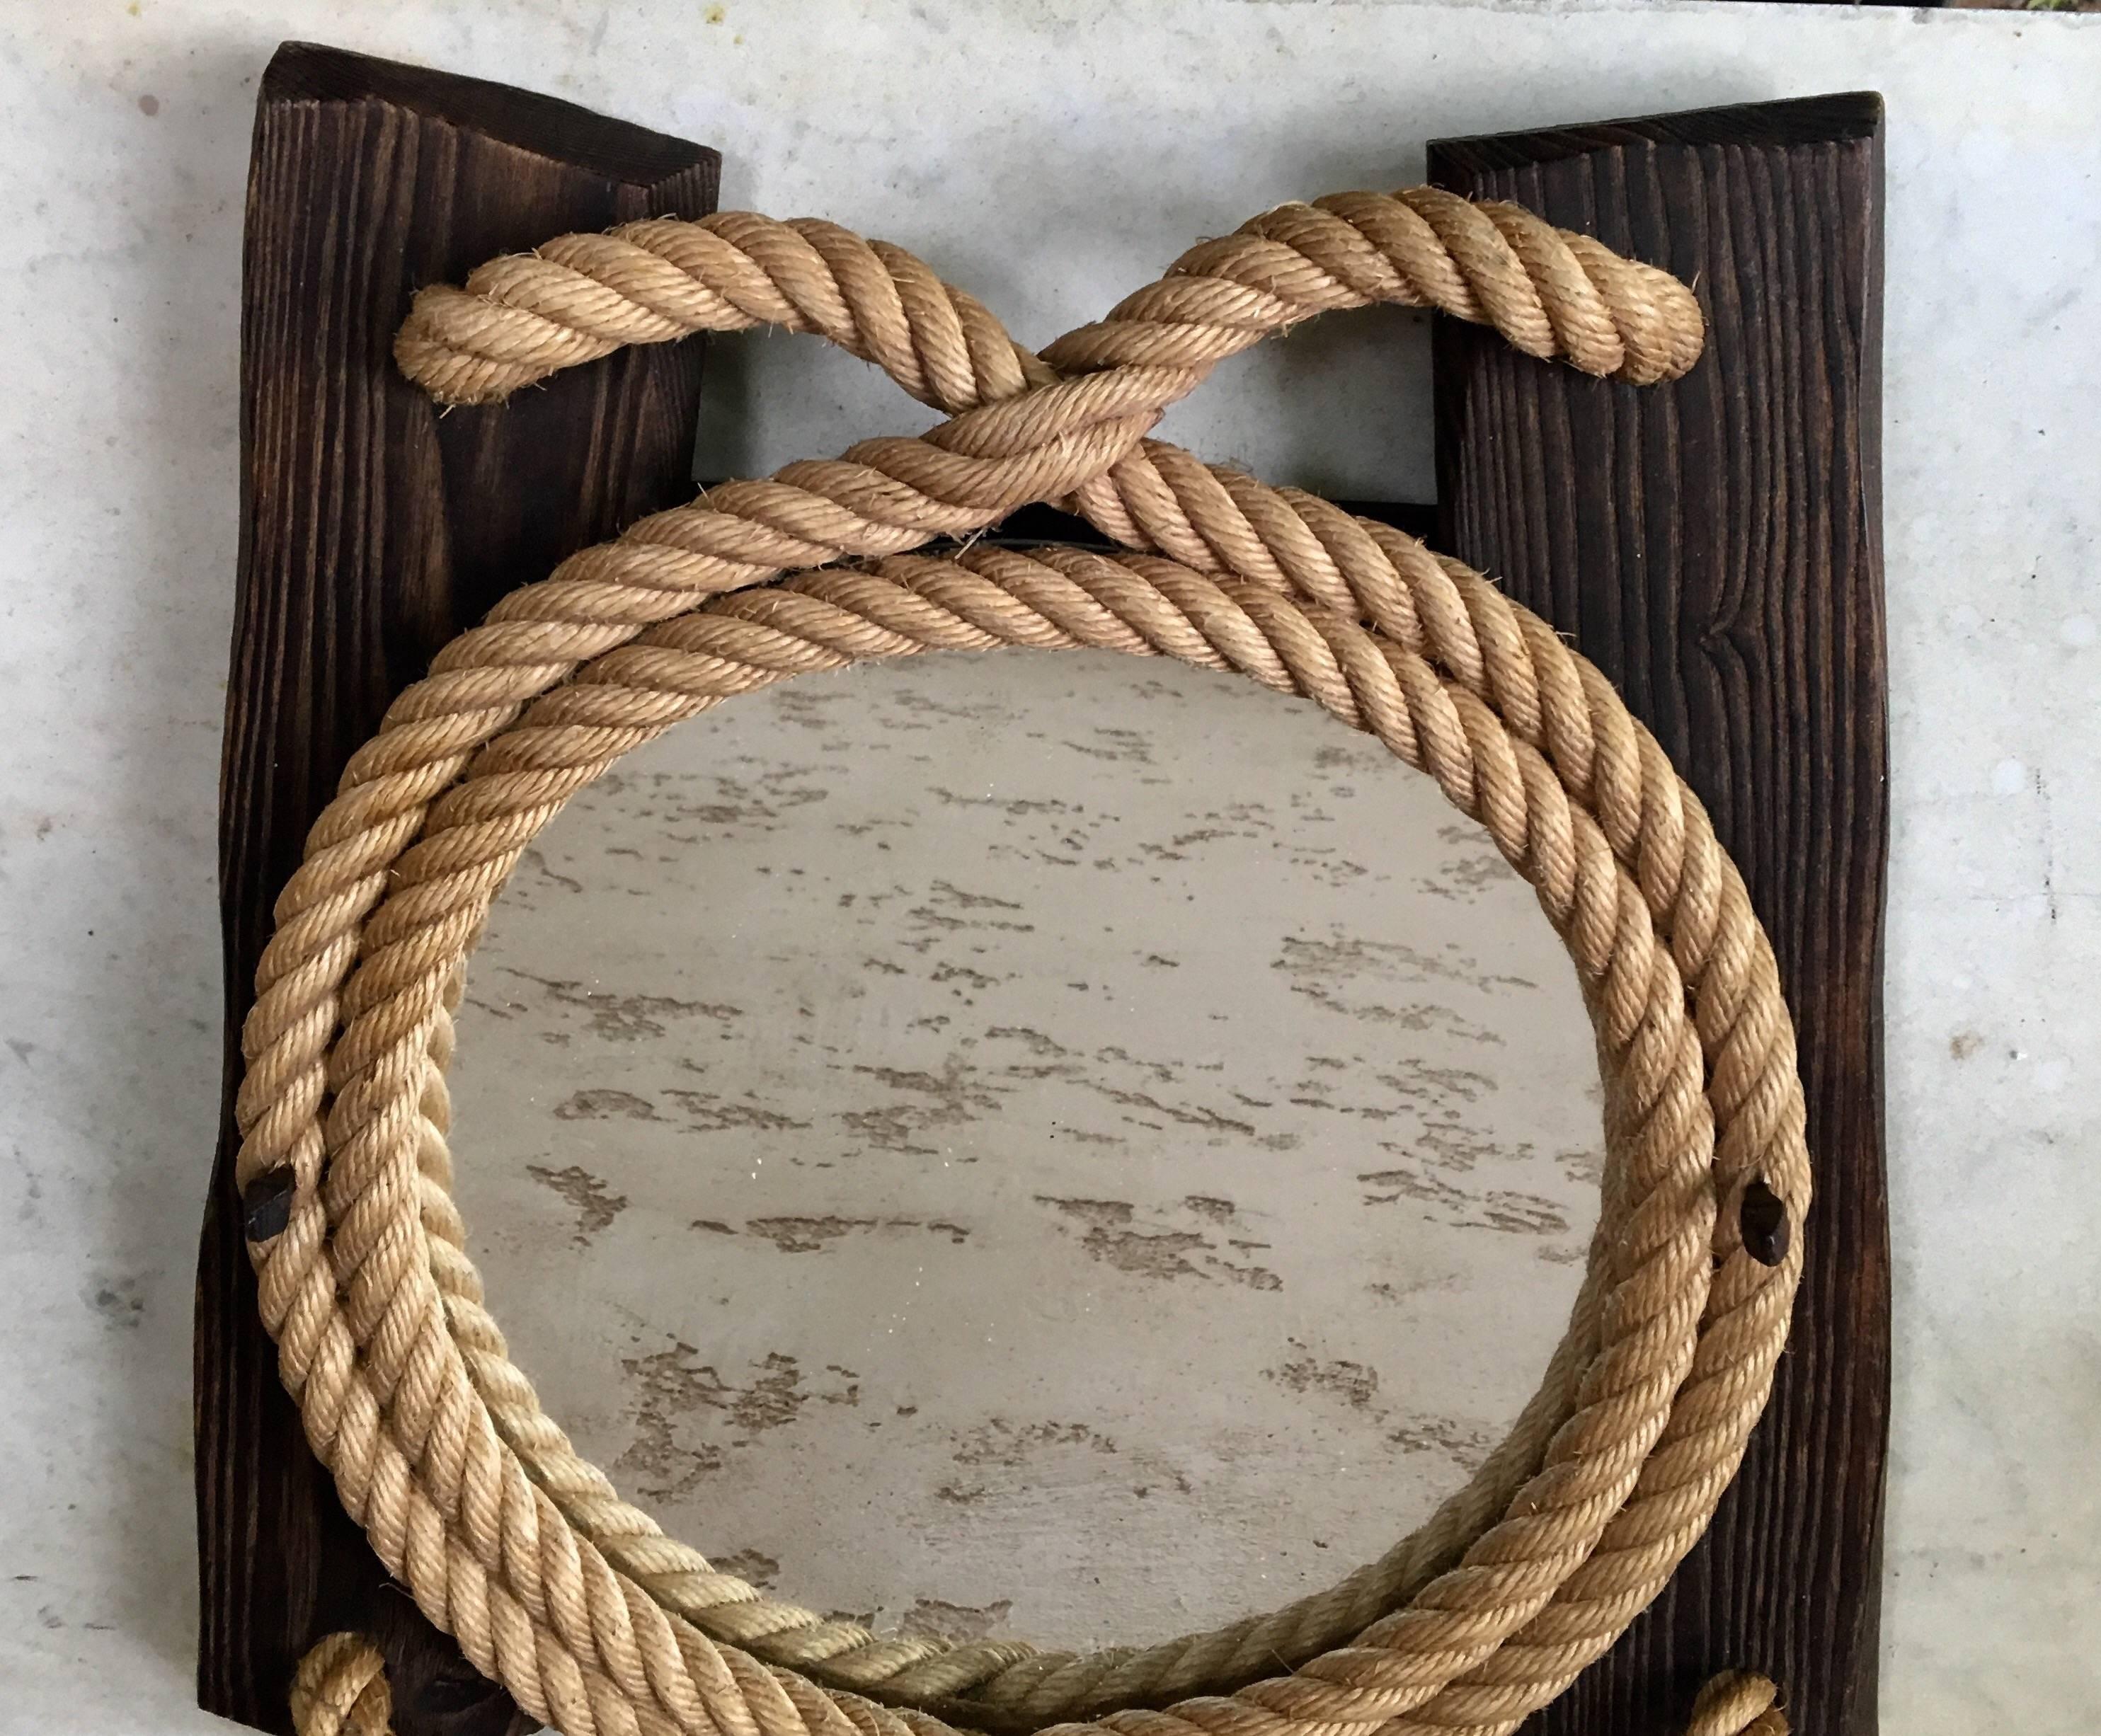 Interesting midcentury rope and wood mirror by Audoux Minet, circa 1960.